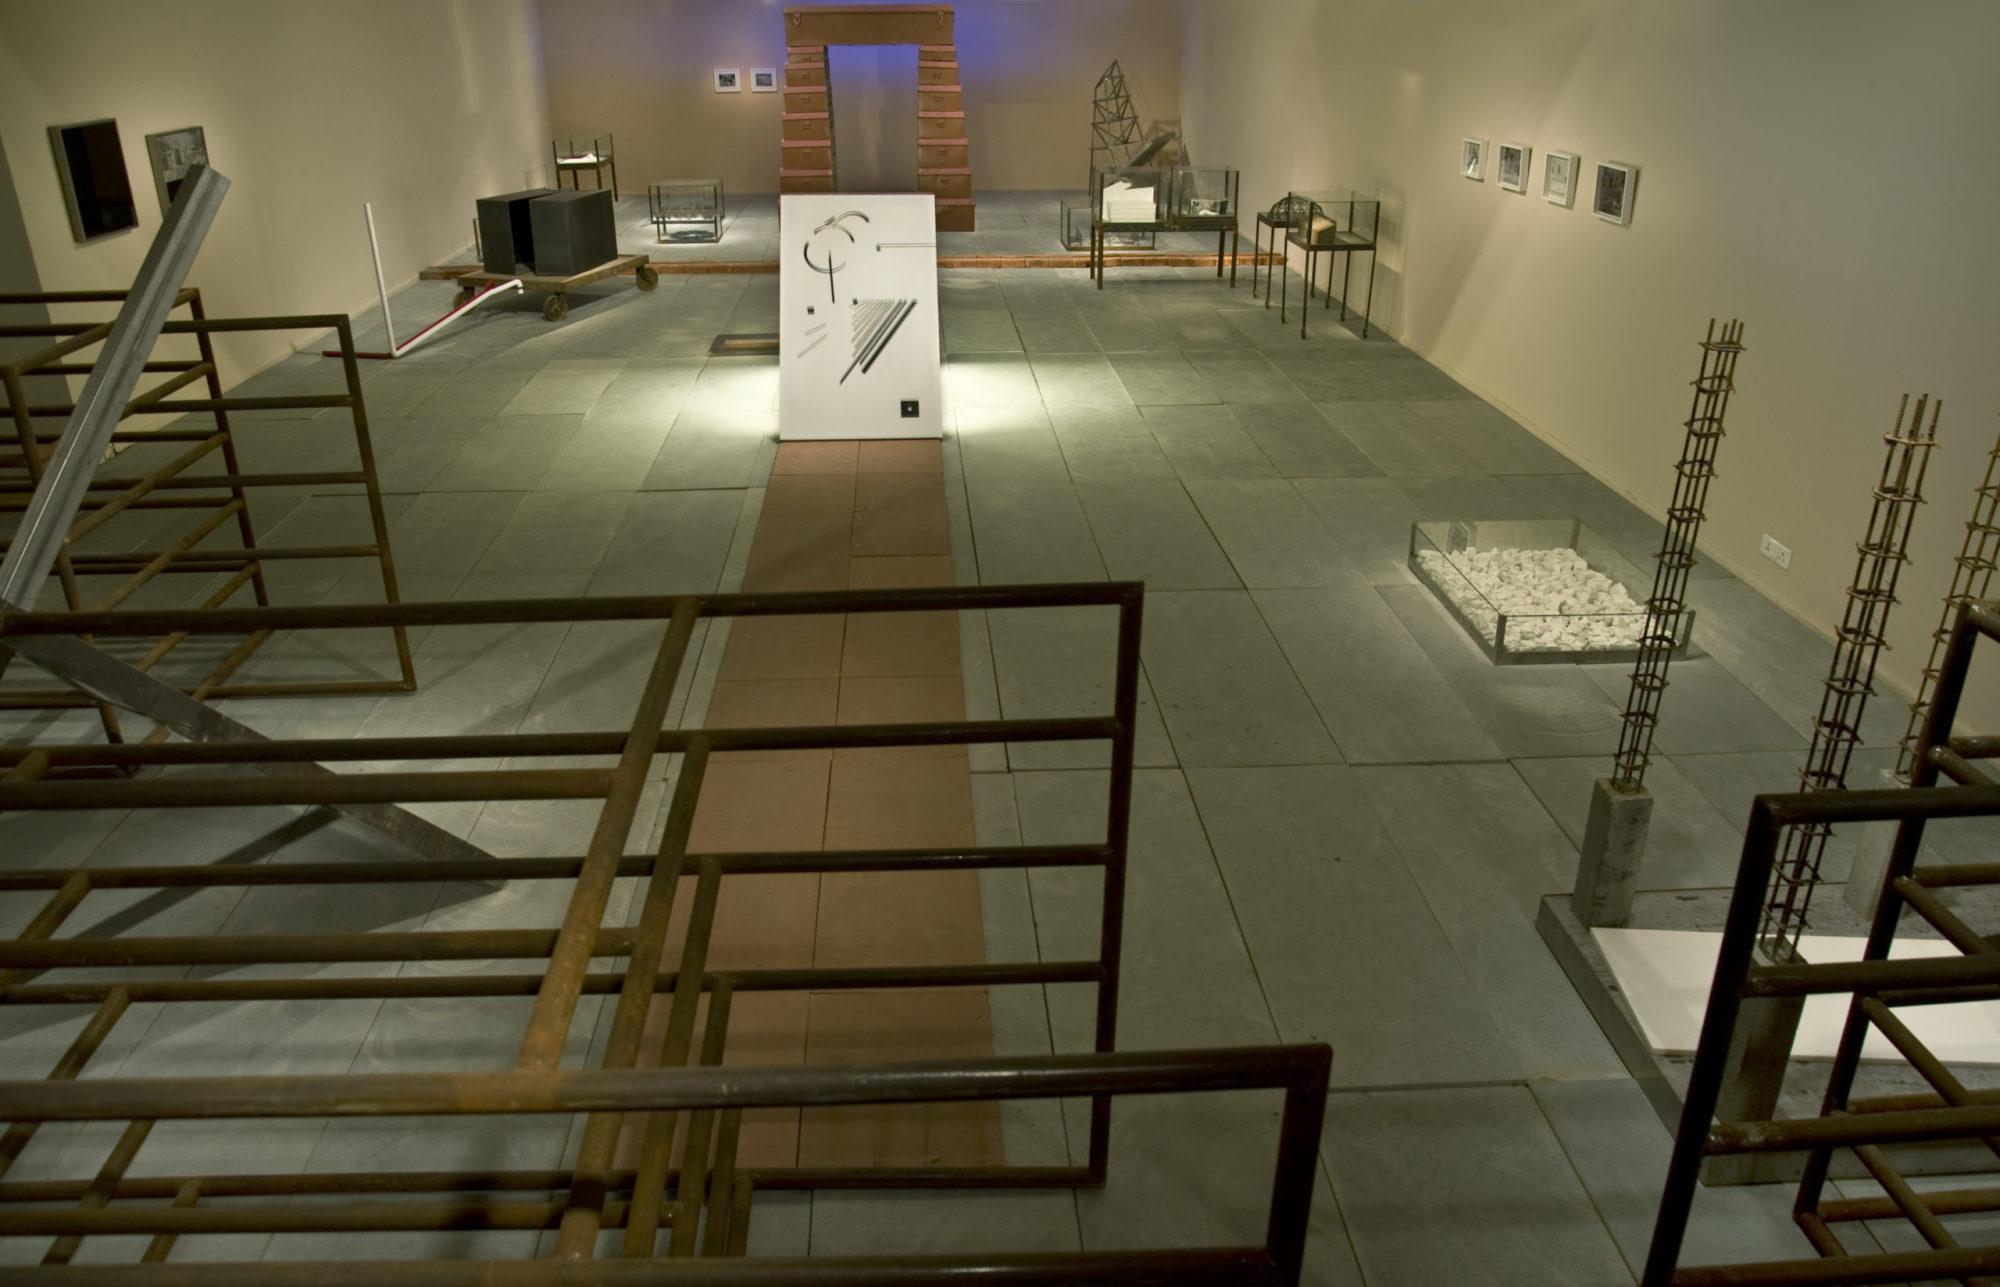 A large indoor gallery showing several artworks. In the foreground there are a series of fixtures which look diagrams, with perfectly measured rectangles atop each other, creating a three dimensional playground. In the center of the room is a brown paneled pathway which leads to a small white board covered in angled lines of different shades of gray and unfinished circles. Behind this is a large light brown altar which is surrounded by smaller pieces in glass tanks. There are several flat pieces framed on both sides of the walls.